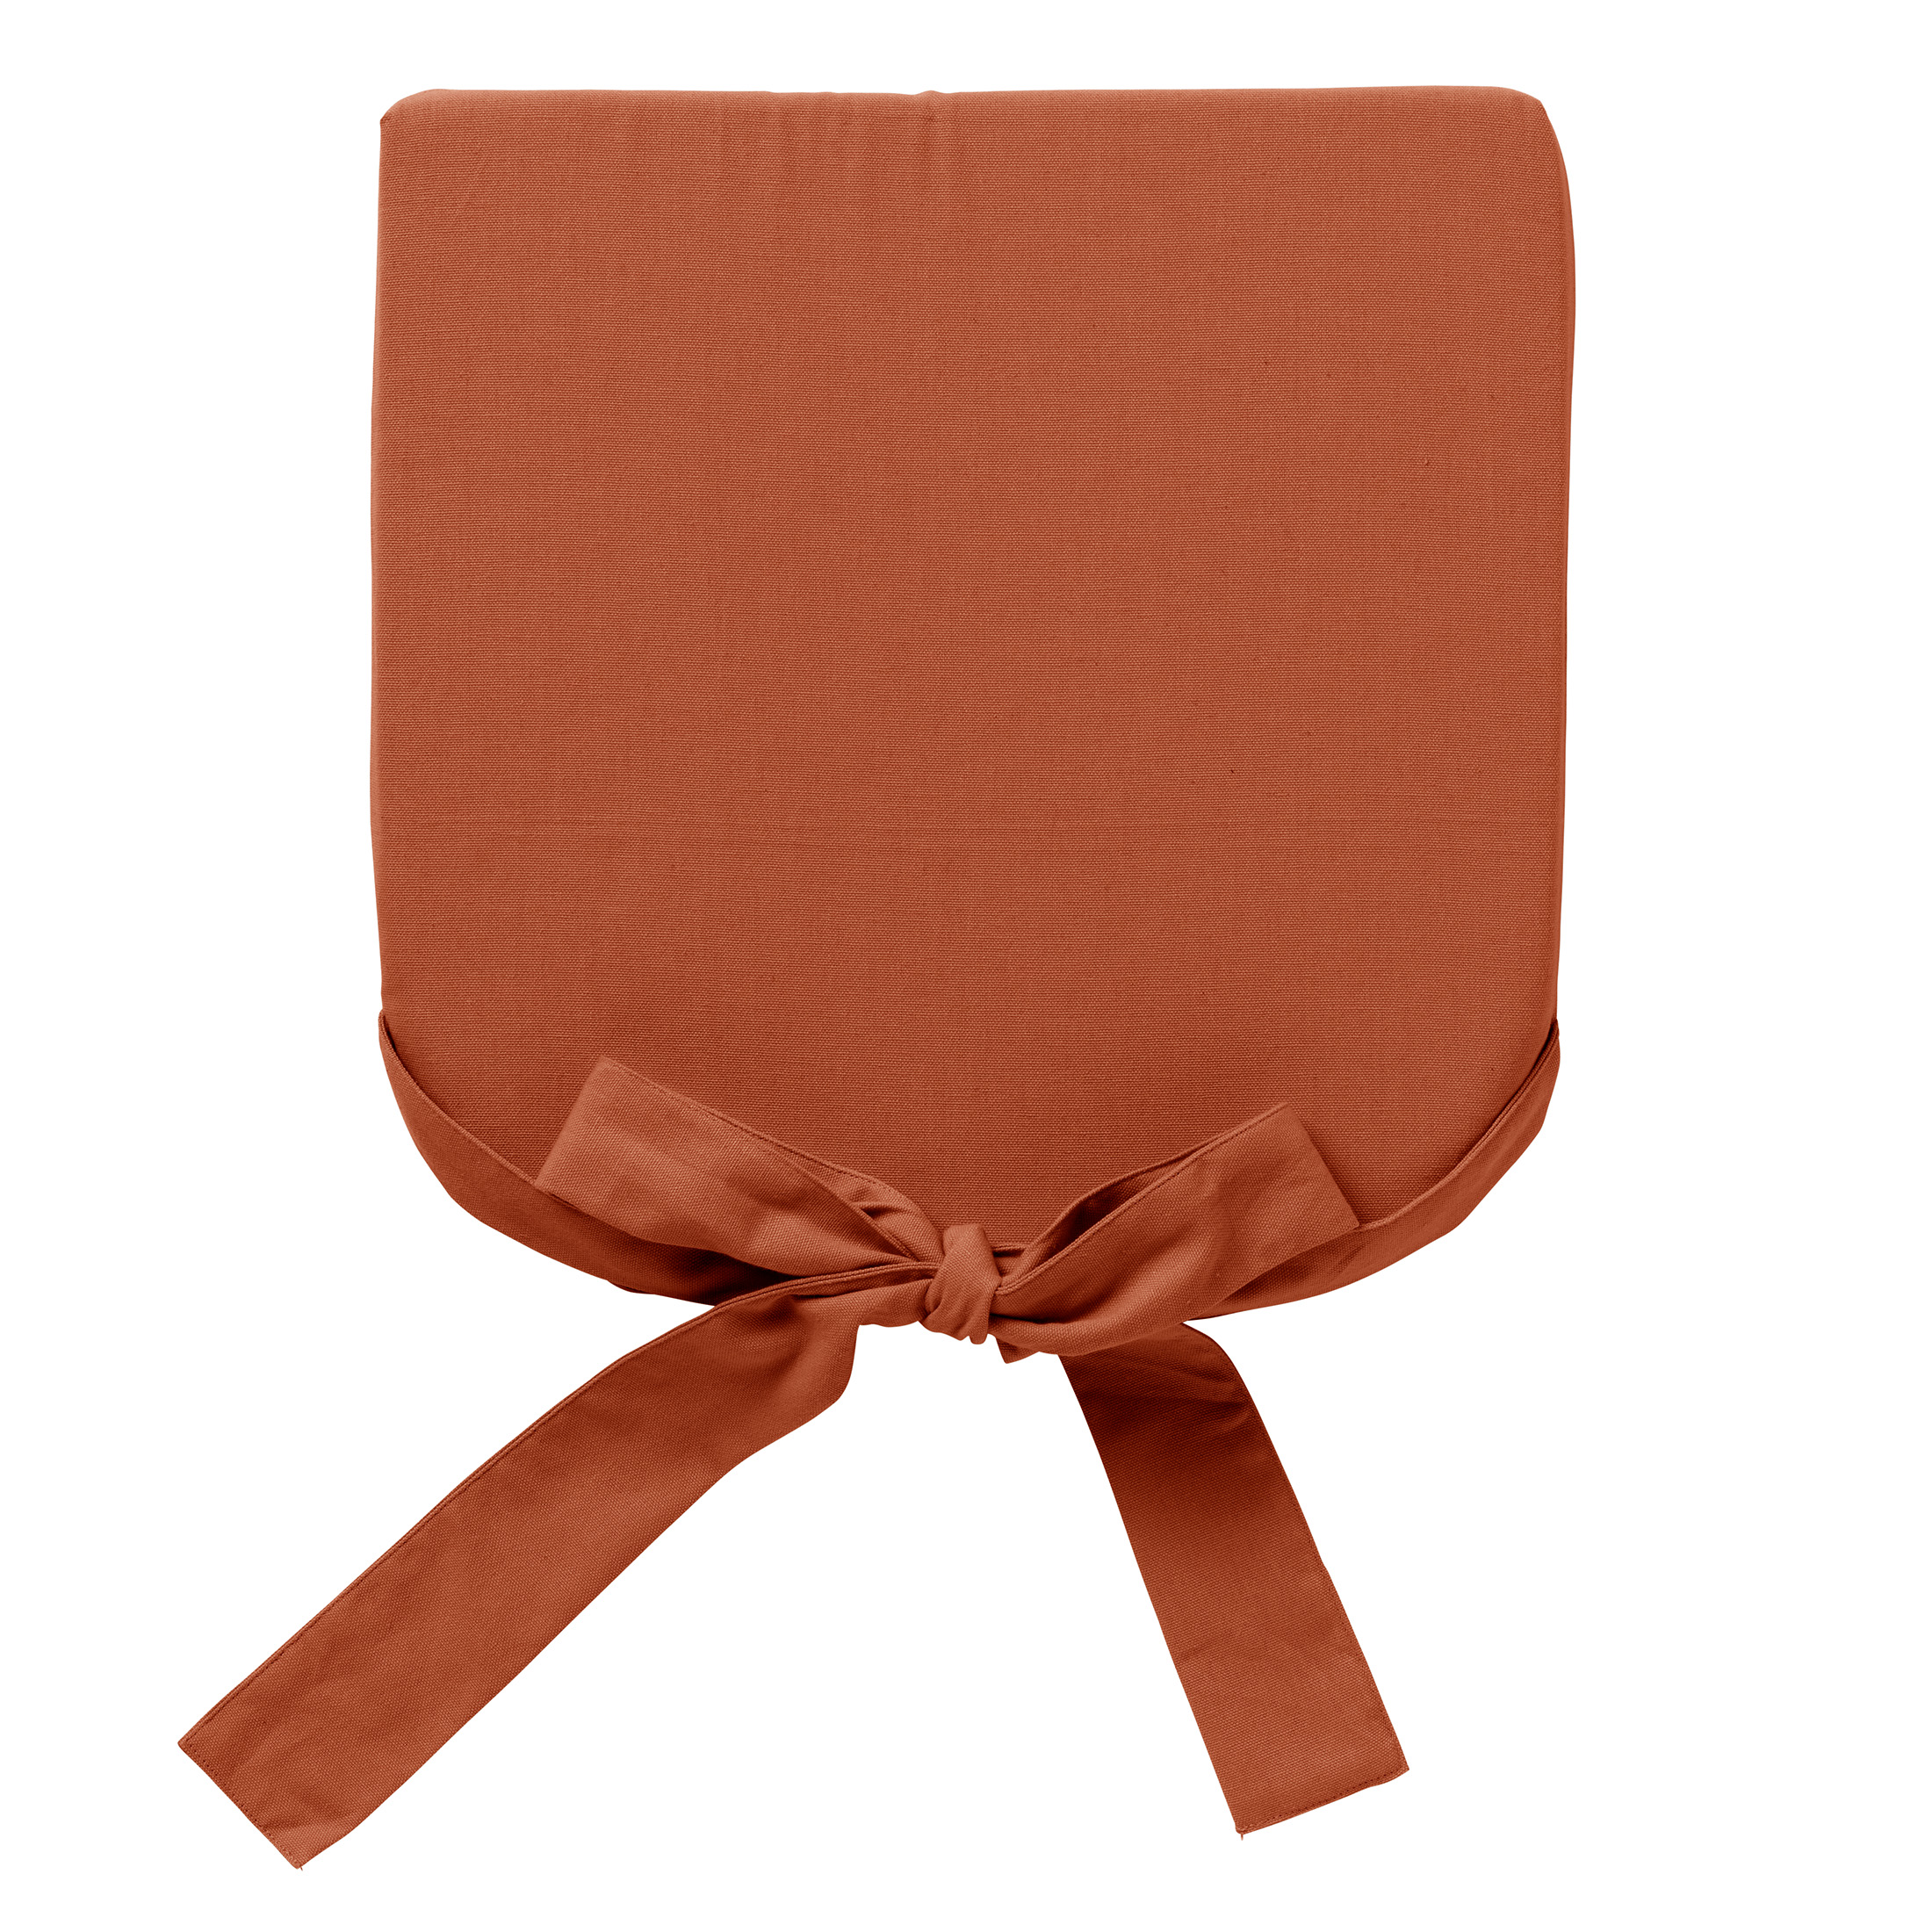 JAVA - Seat pad cushion with ties Potters Clay 40x40 cm